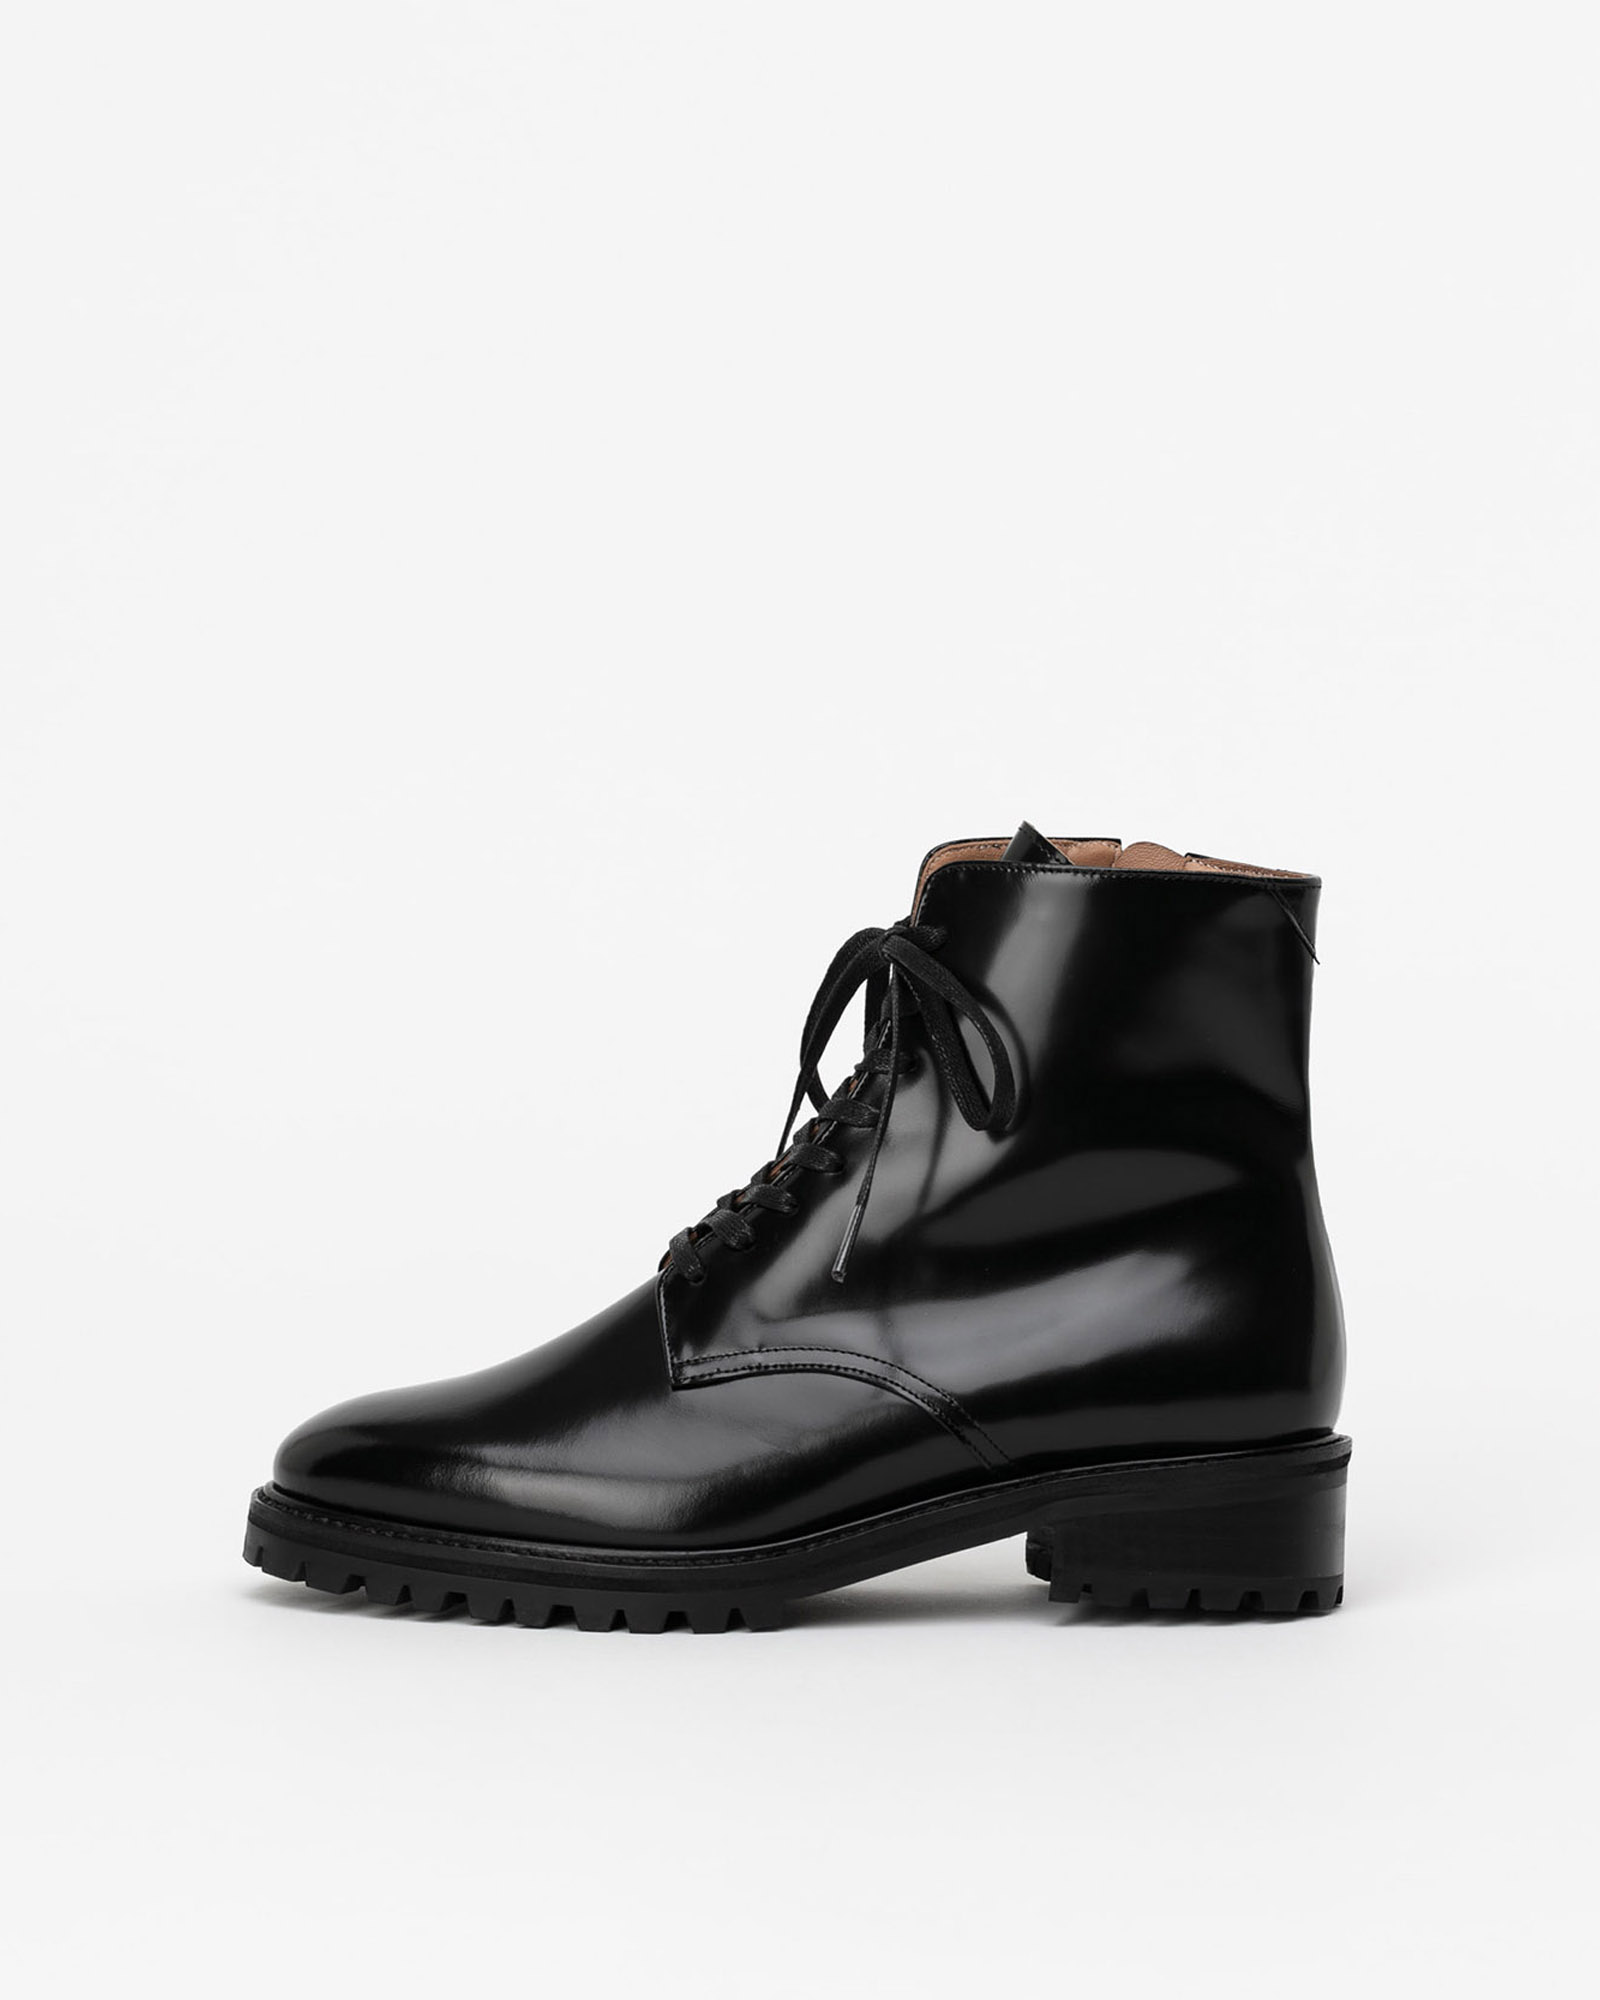 Starling Lace-up Boots in Black Box